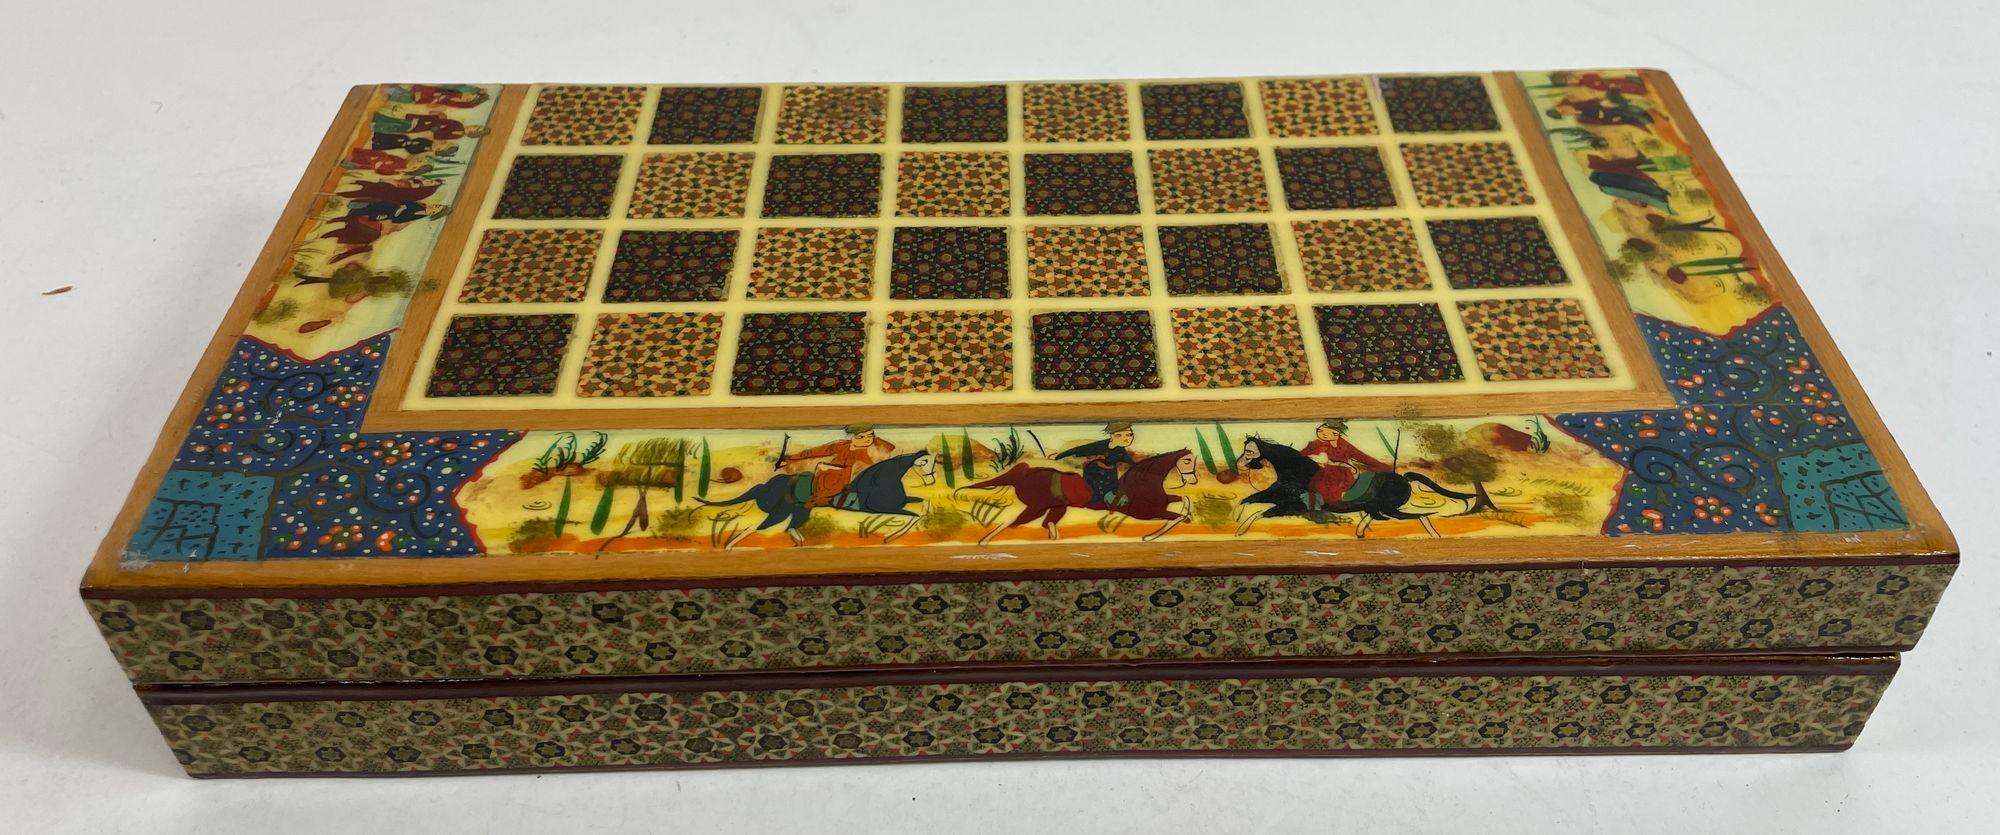 Vintage Persian Micro Mosaic Chess Game Box For Sale 7